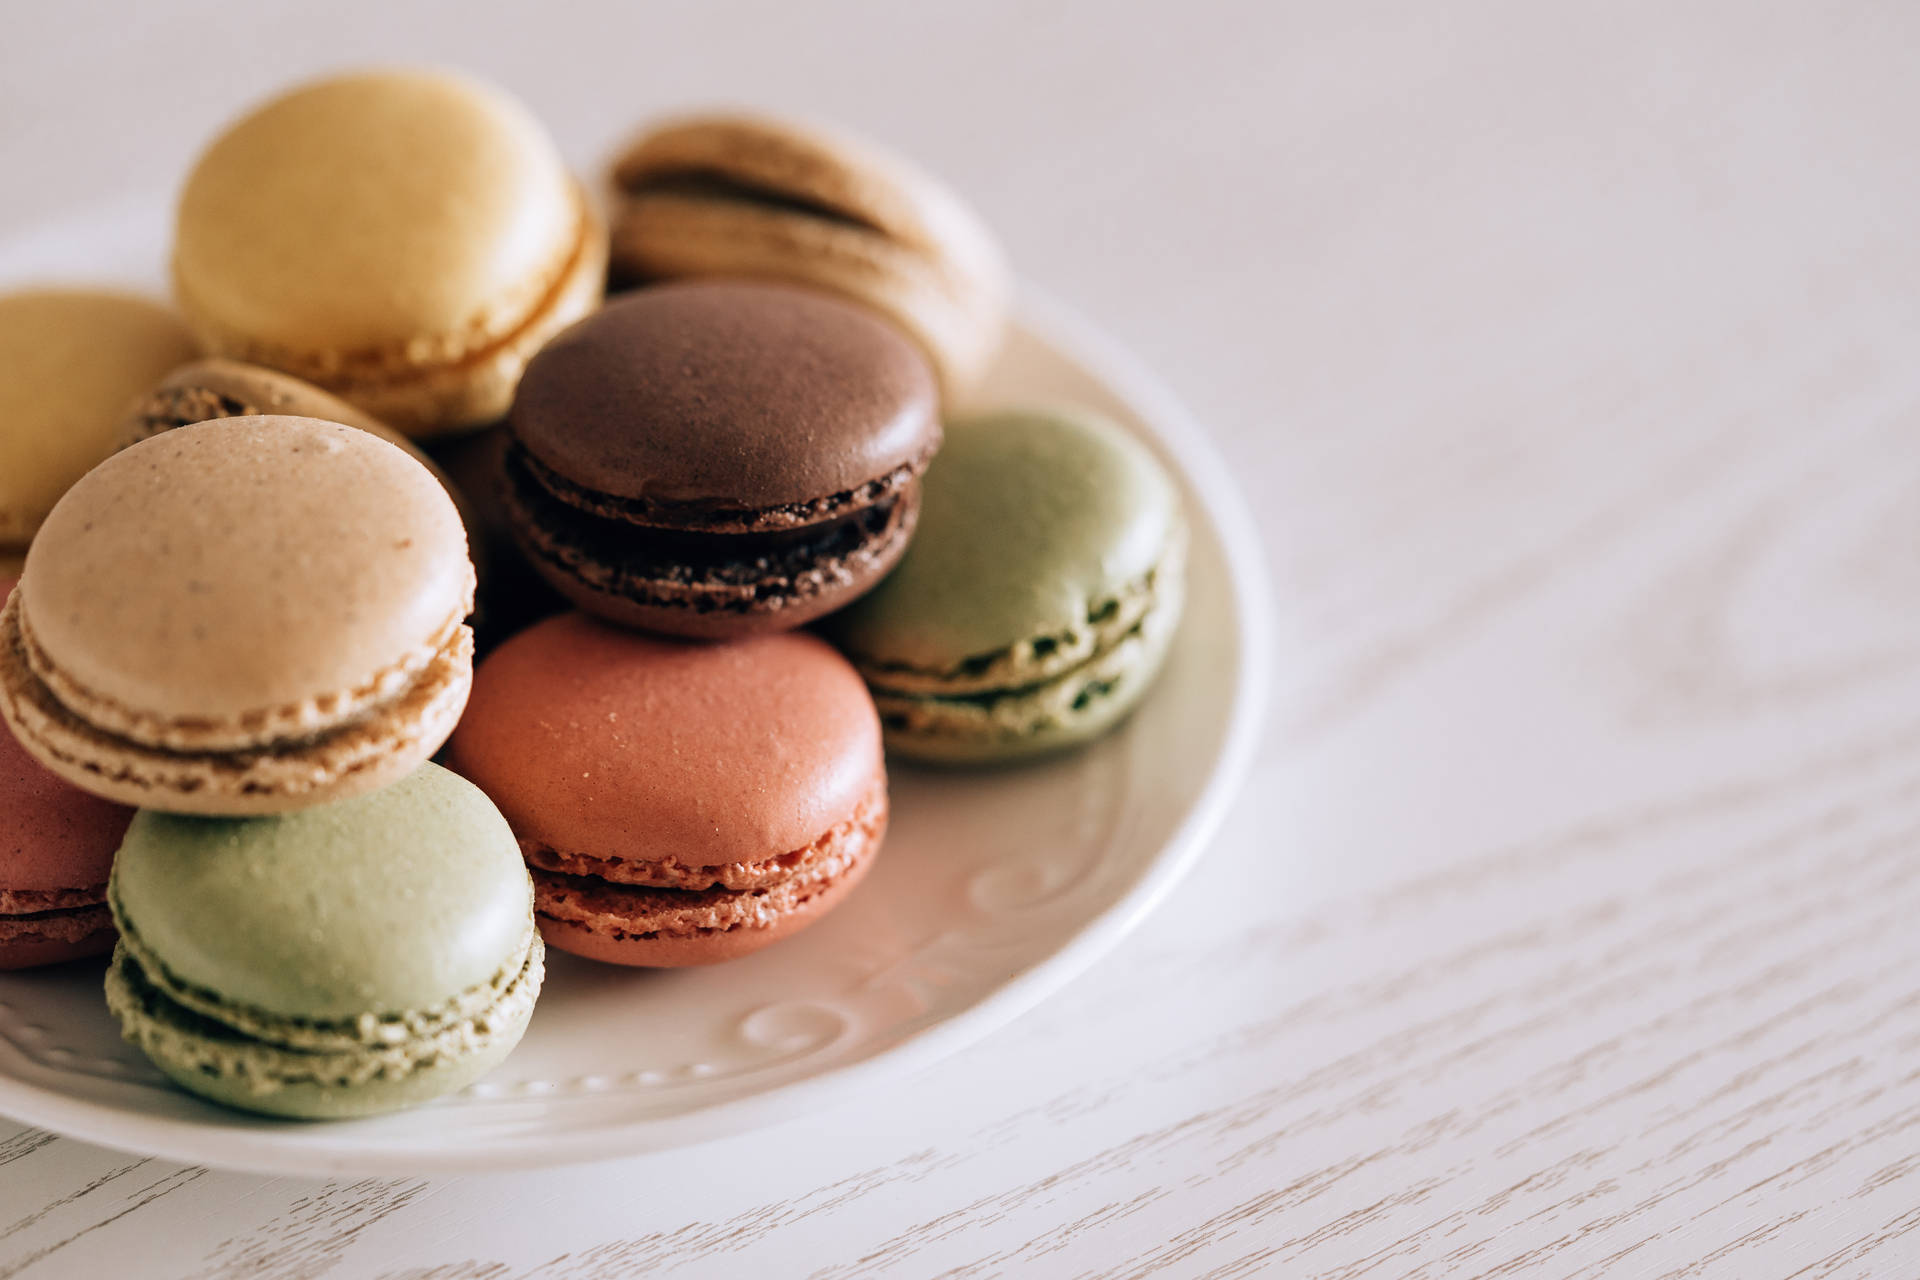 Pretty Pastel Macaroons On Plate Wallpaper